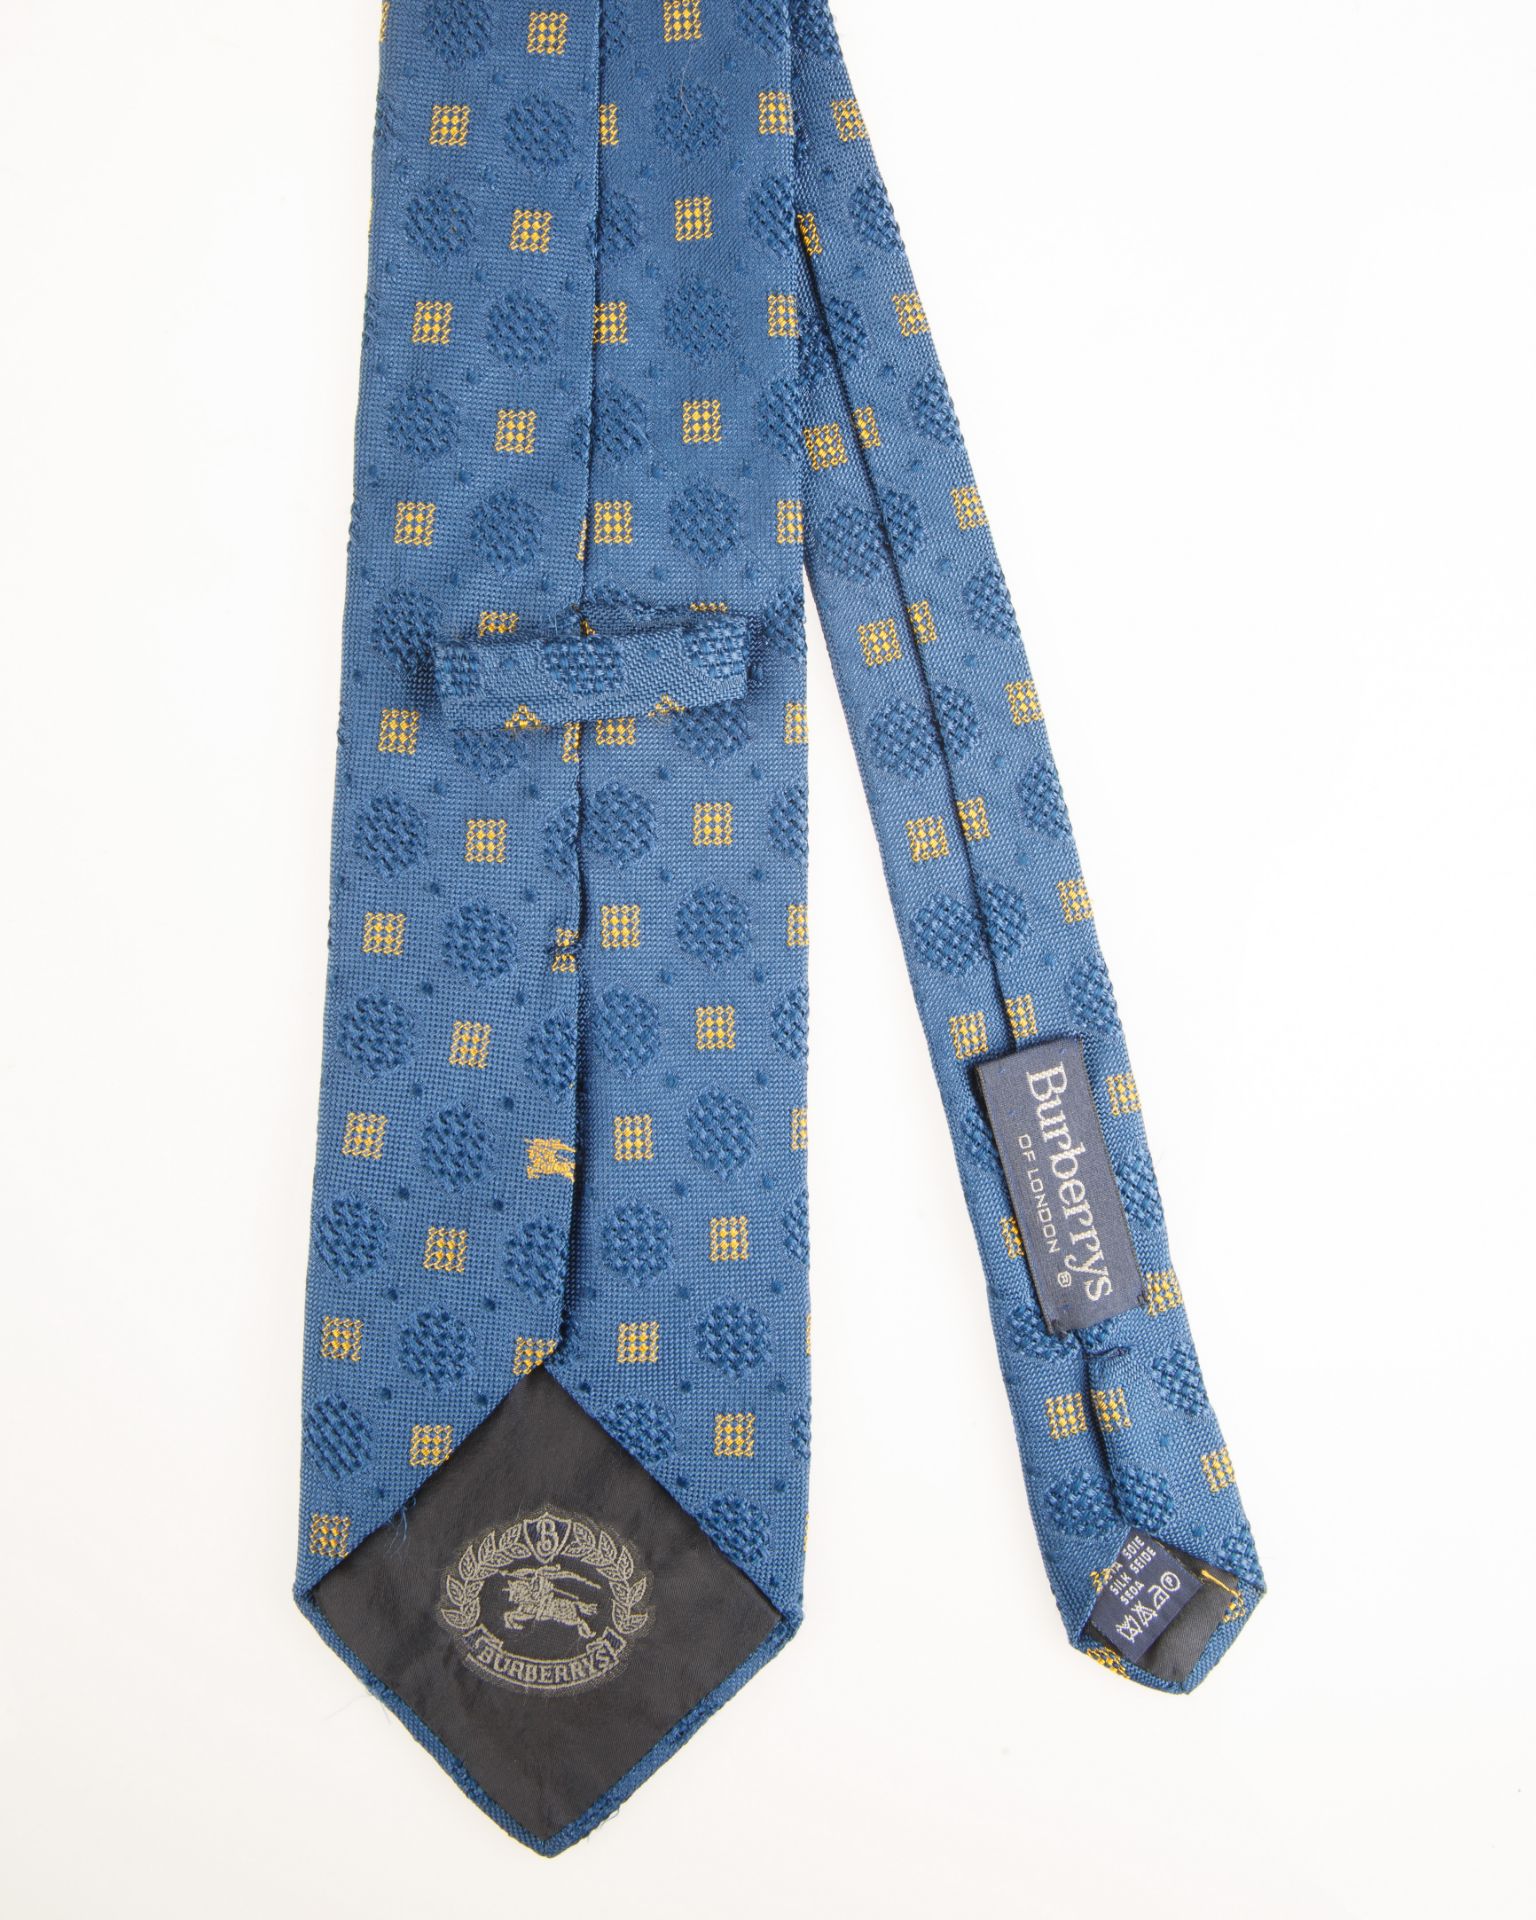 GROUP OF FIVE BURBERRY TIES - Image 11 of 11